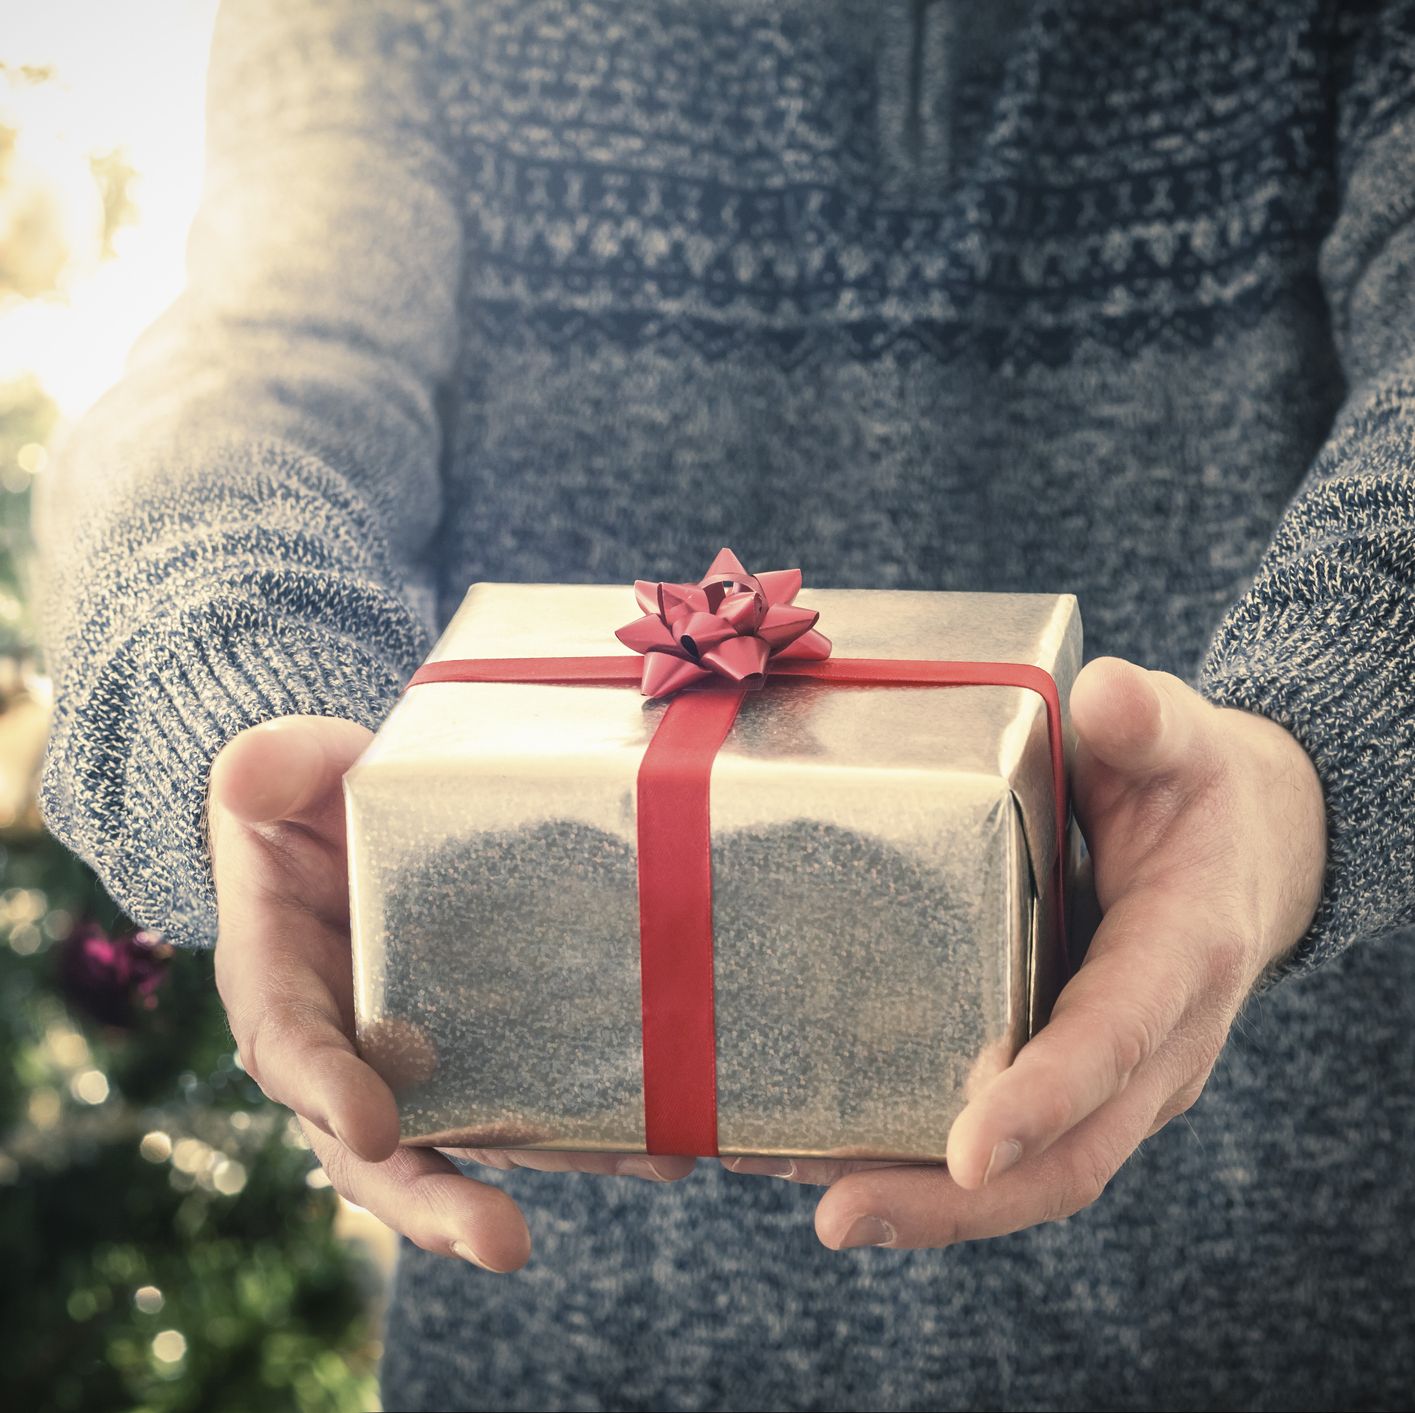 We Stopped Giving Gifts for Christmas - How to Have a No-Gift